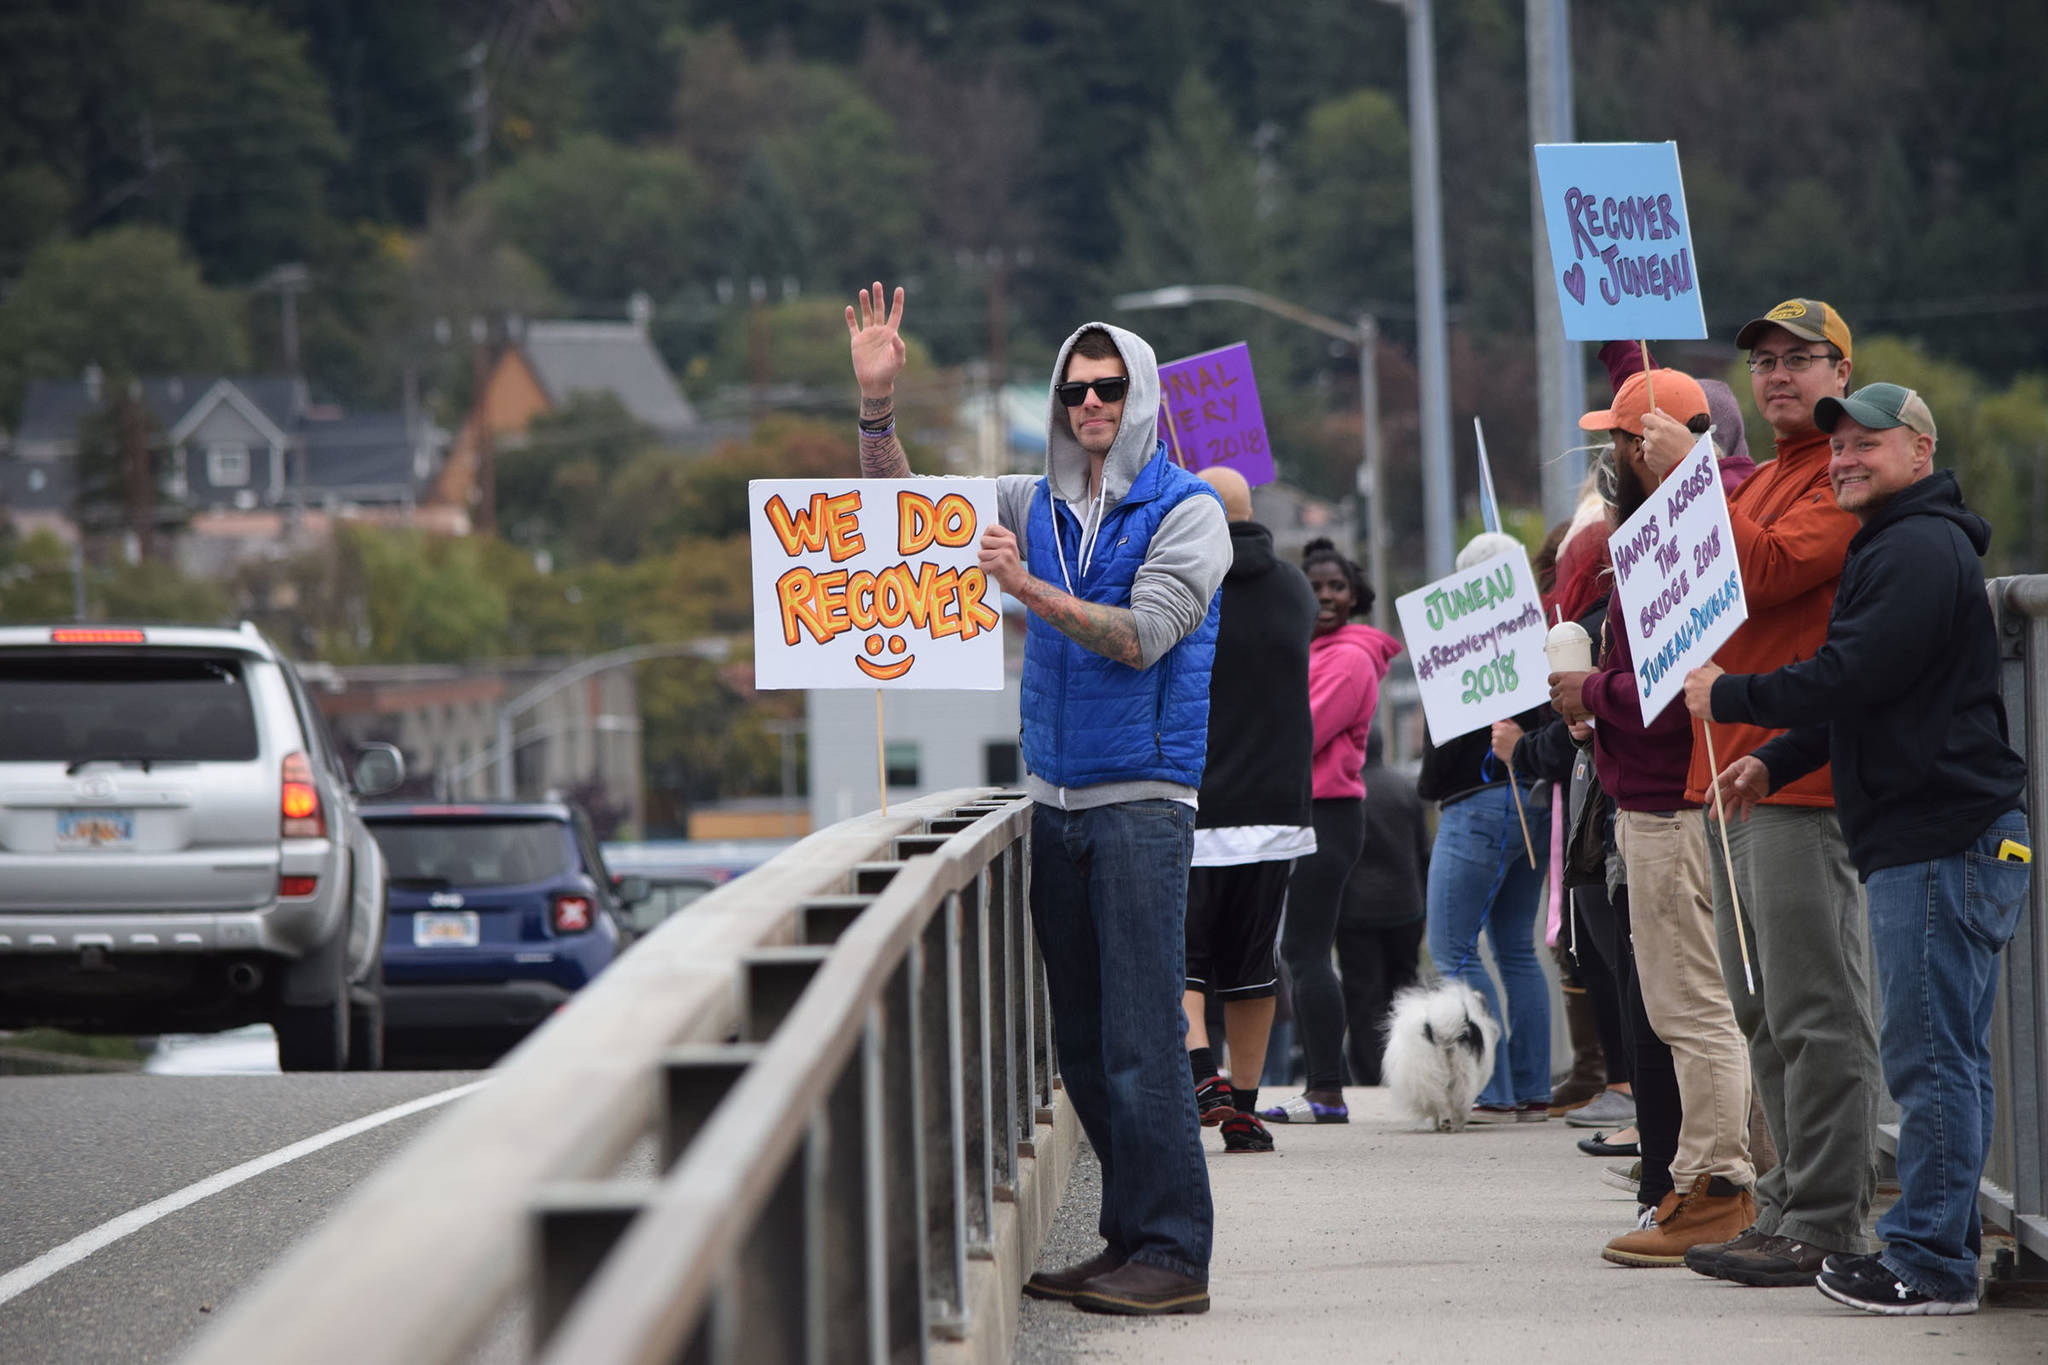 William Musser waves to passing cars on the Douglas Bridge on Saturday, Sept. 22, during the Hands Across the Bridge event, which aims to spread awareness about substance use recovery in Juneau. (Kevin Gullufsen | Juneau Empire)